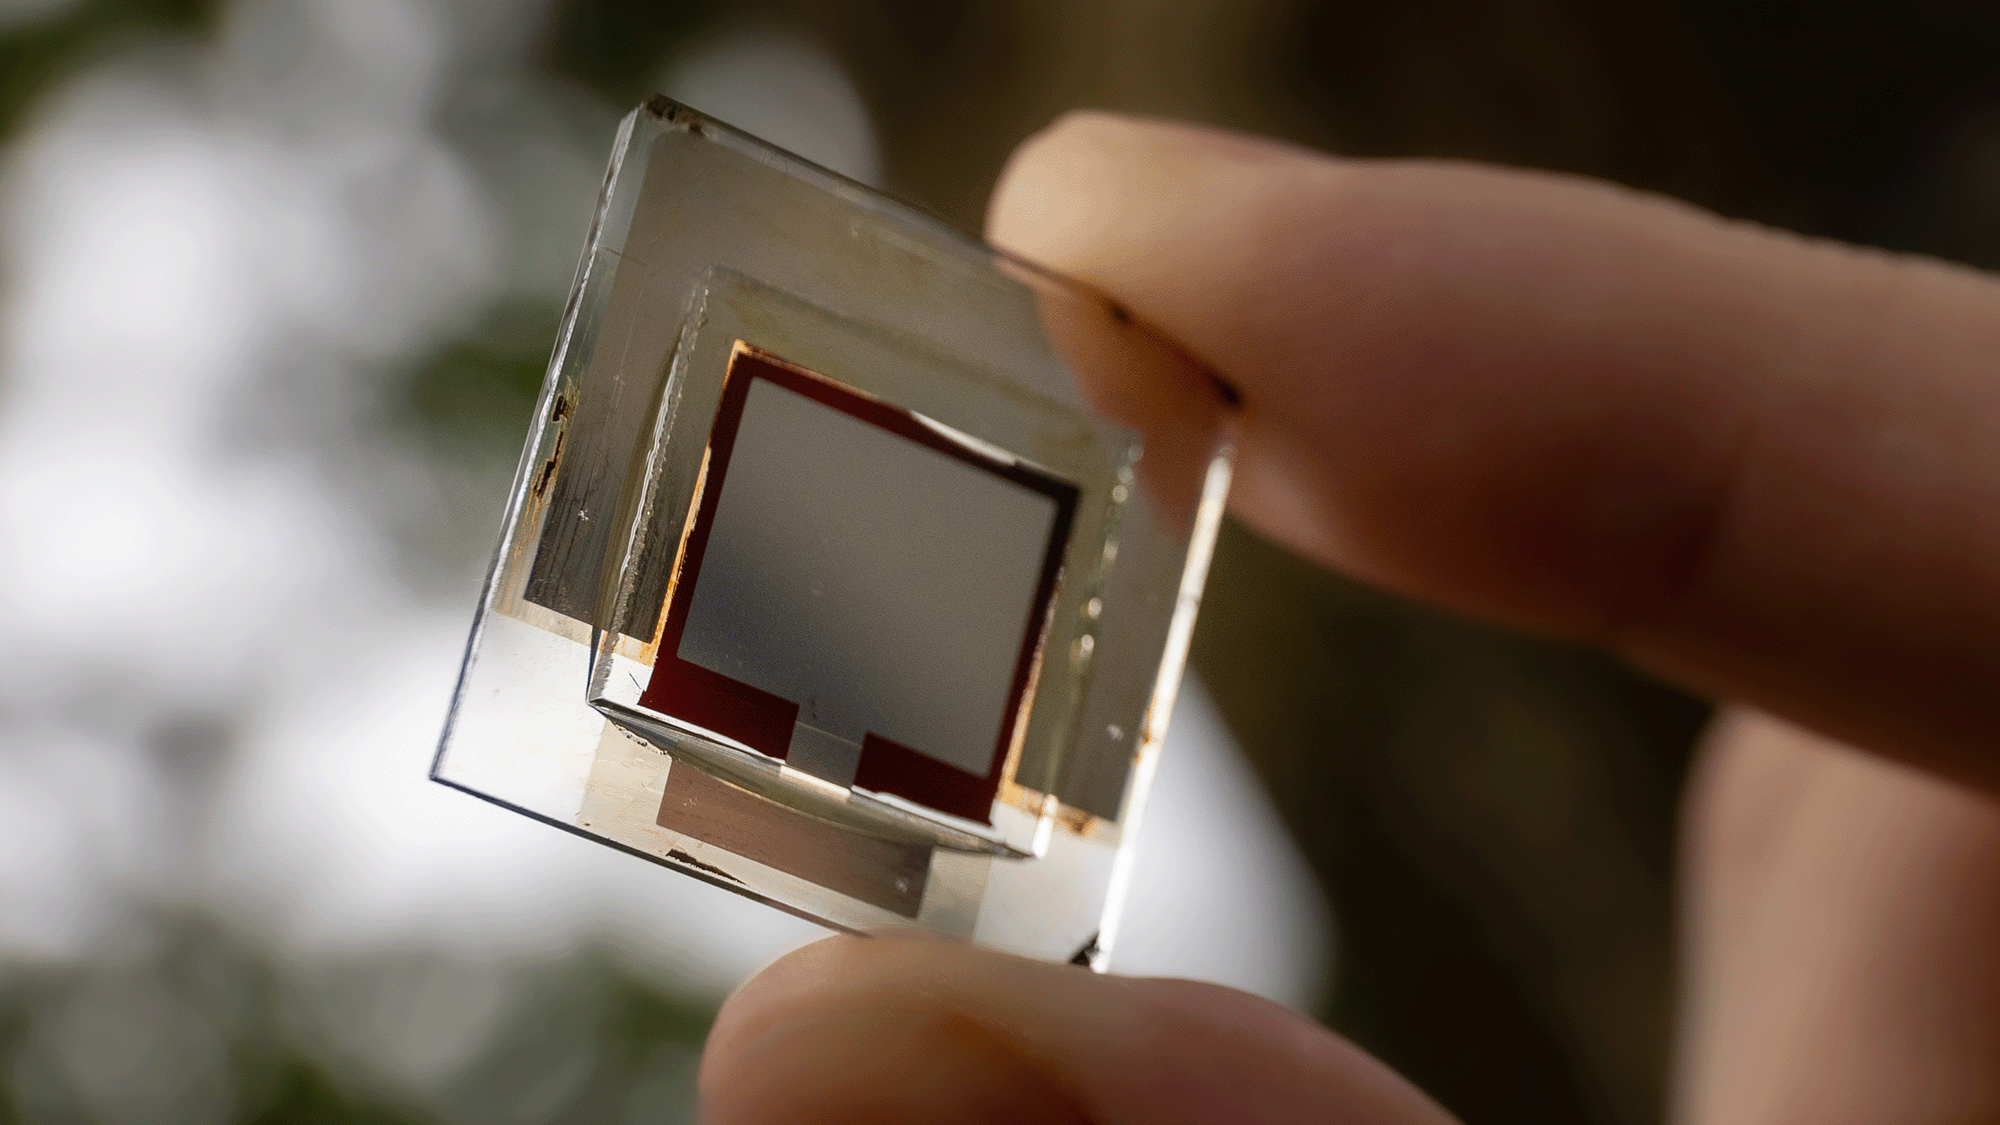 Perovskite solar cells could potentially be used in many different locations and applications